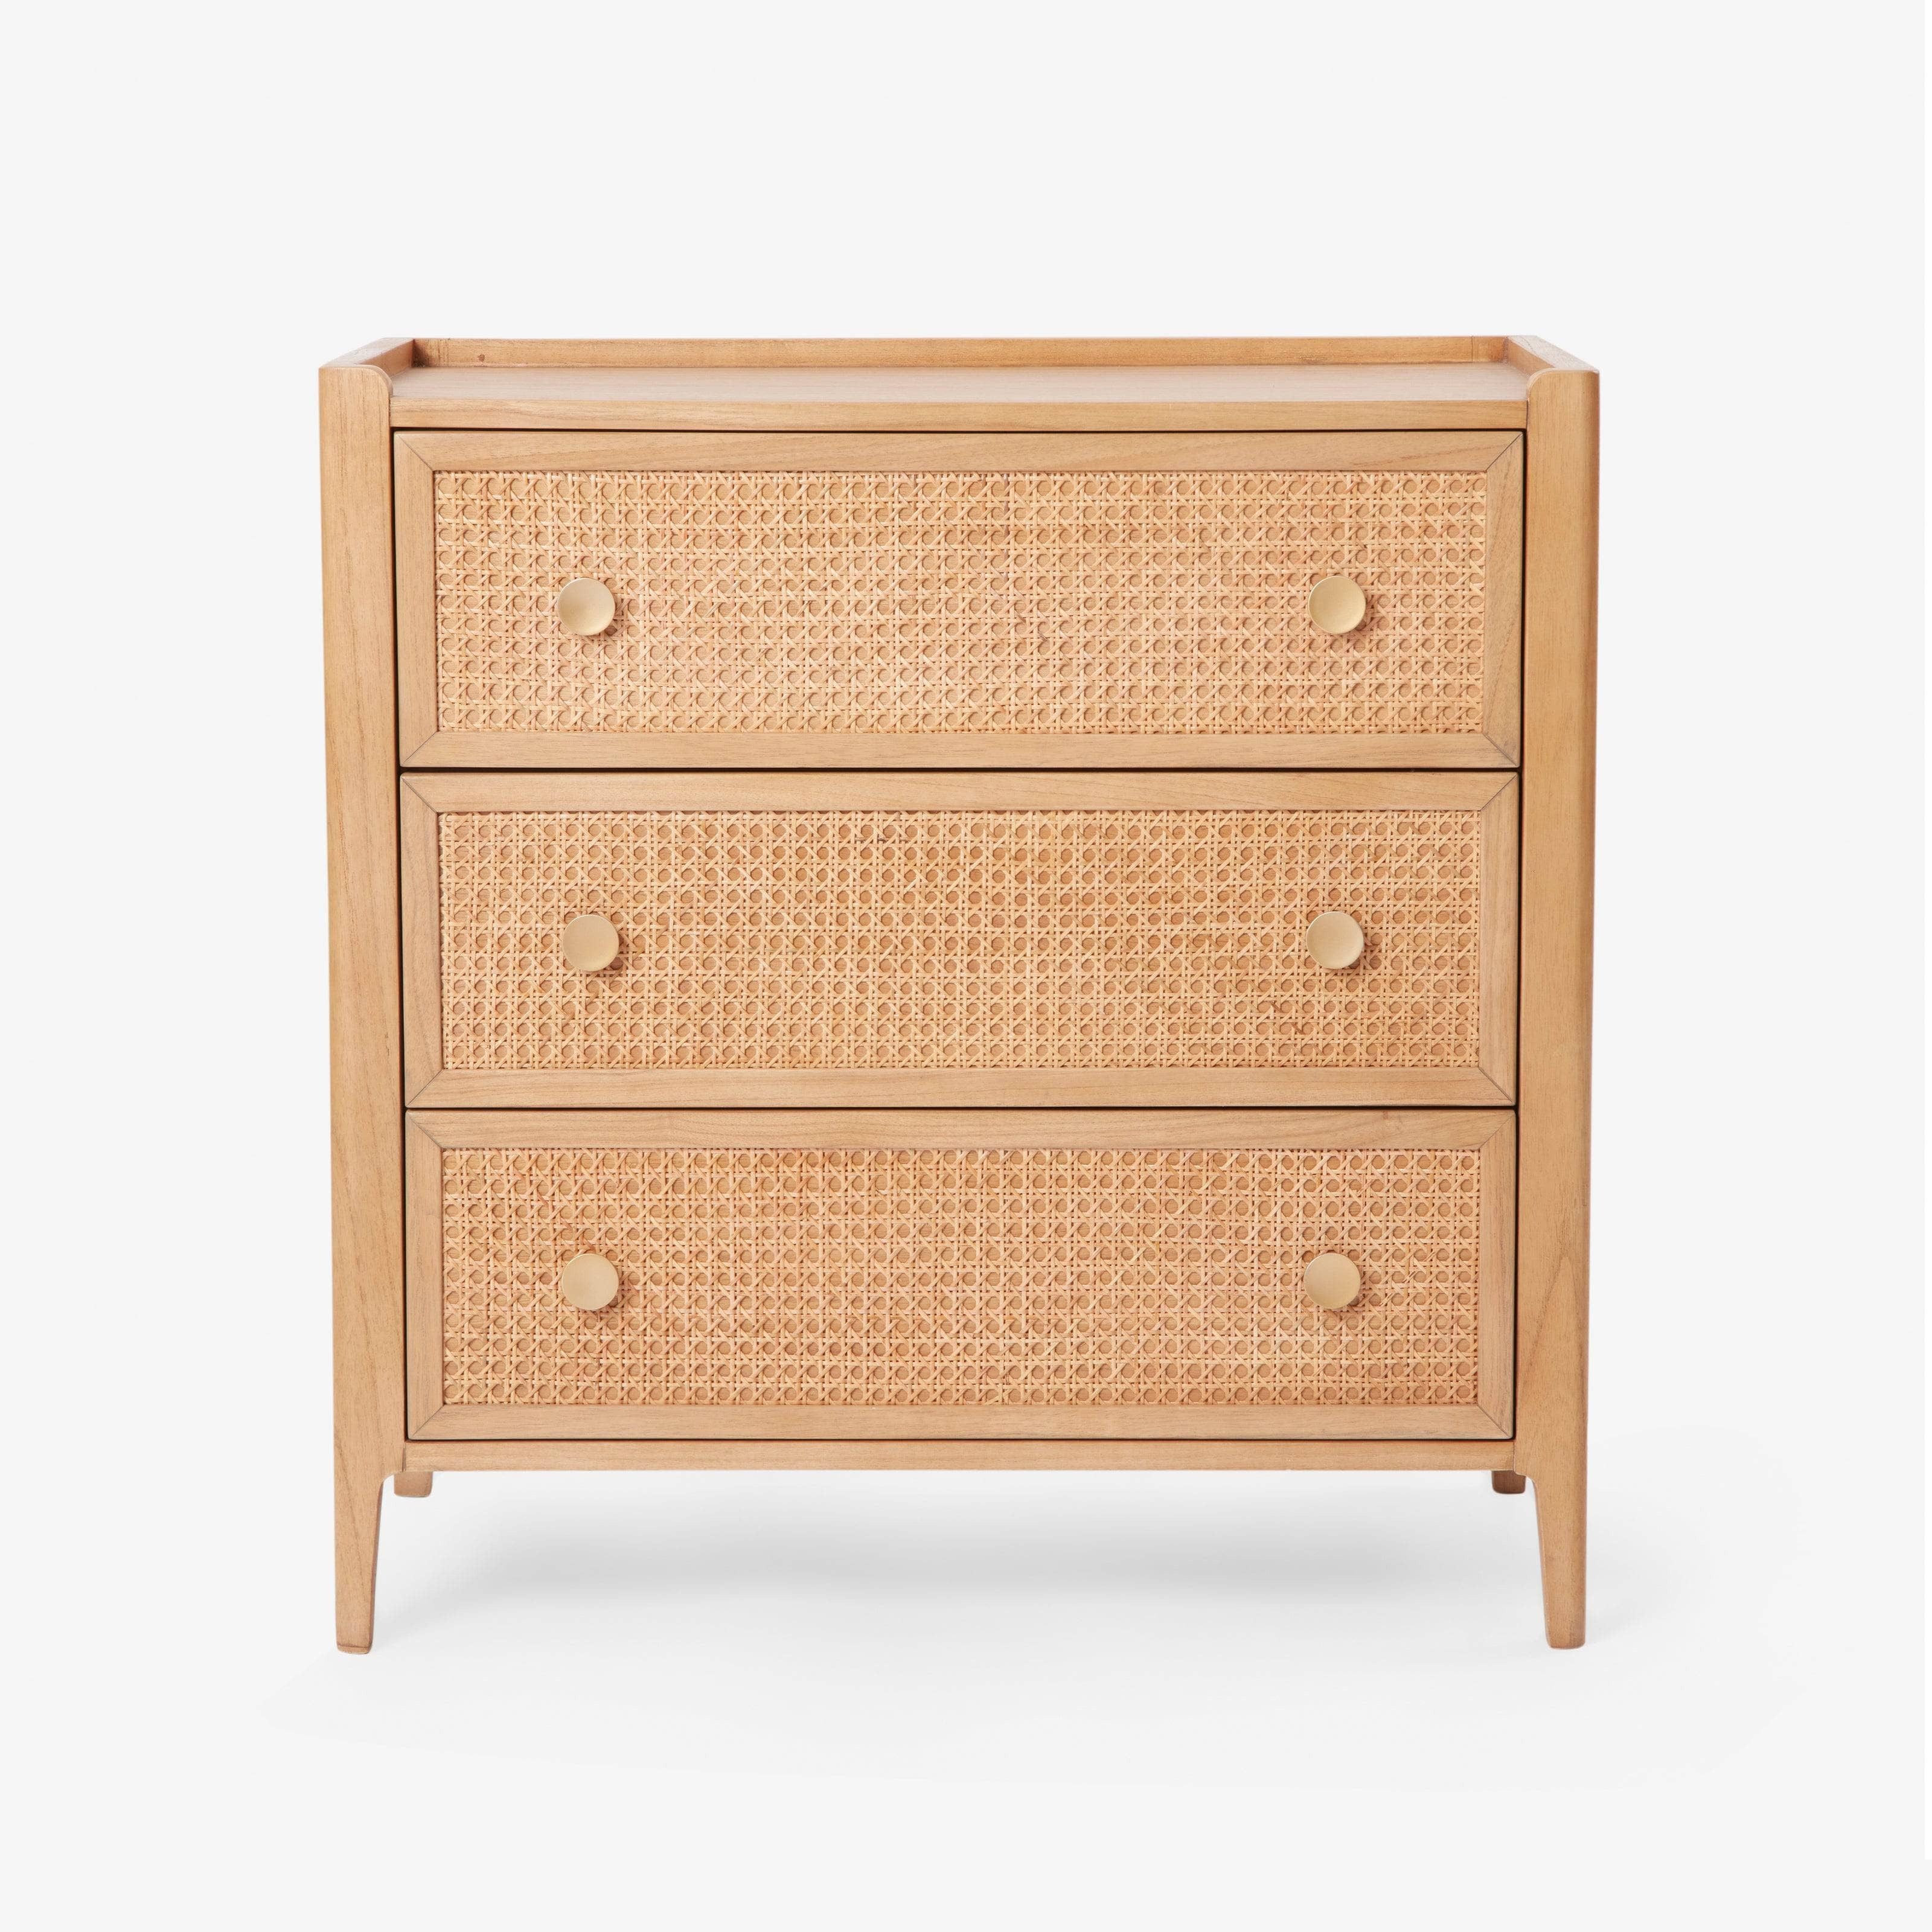 Letto Rattan 3 Drawer Chest, Wood